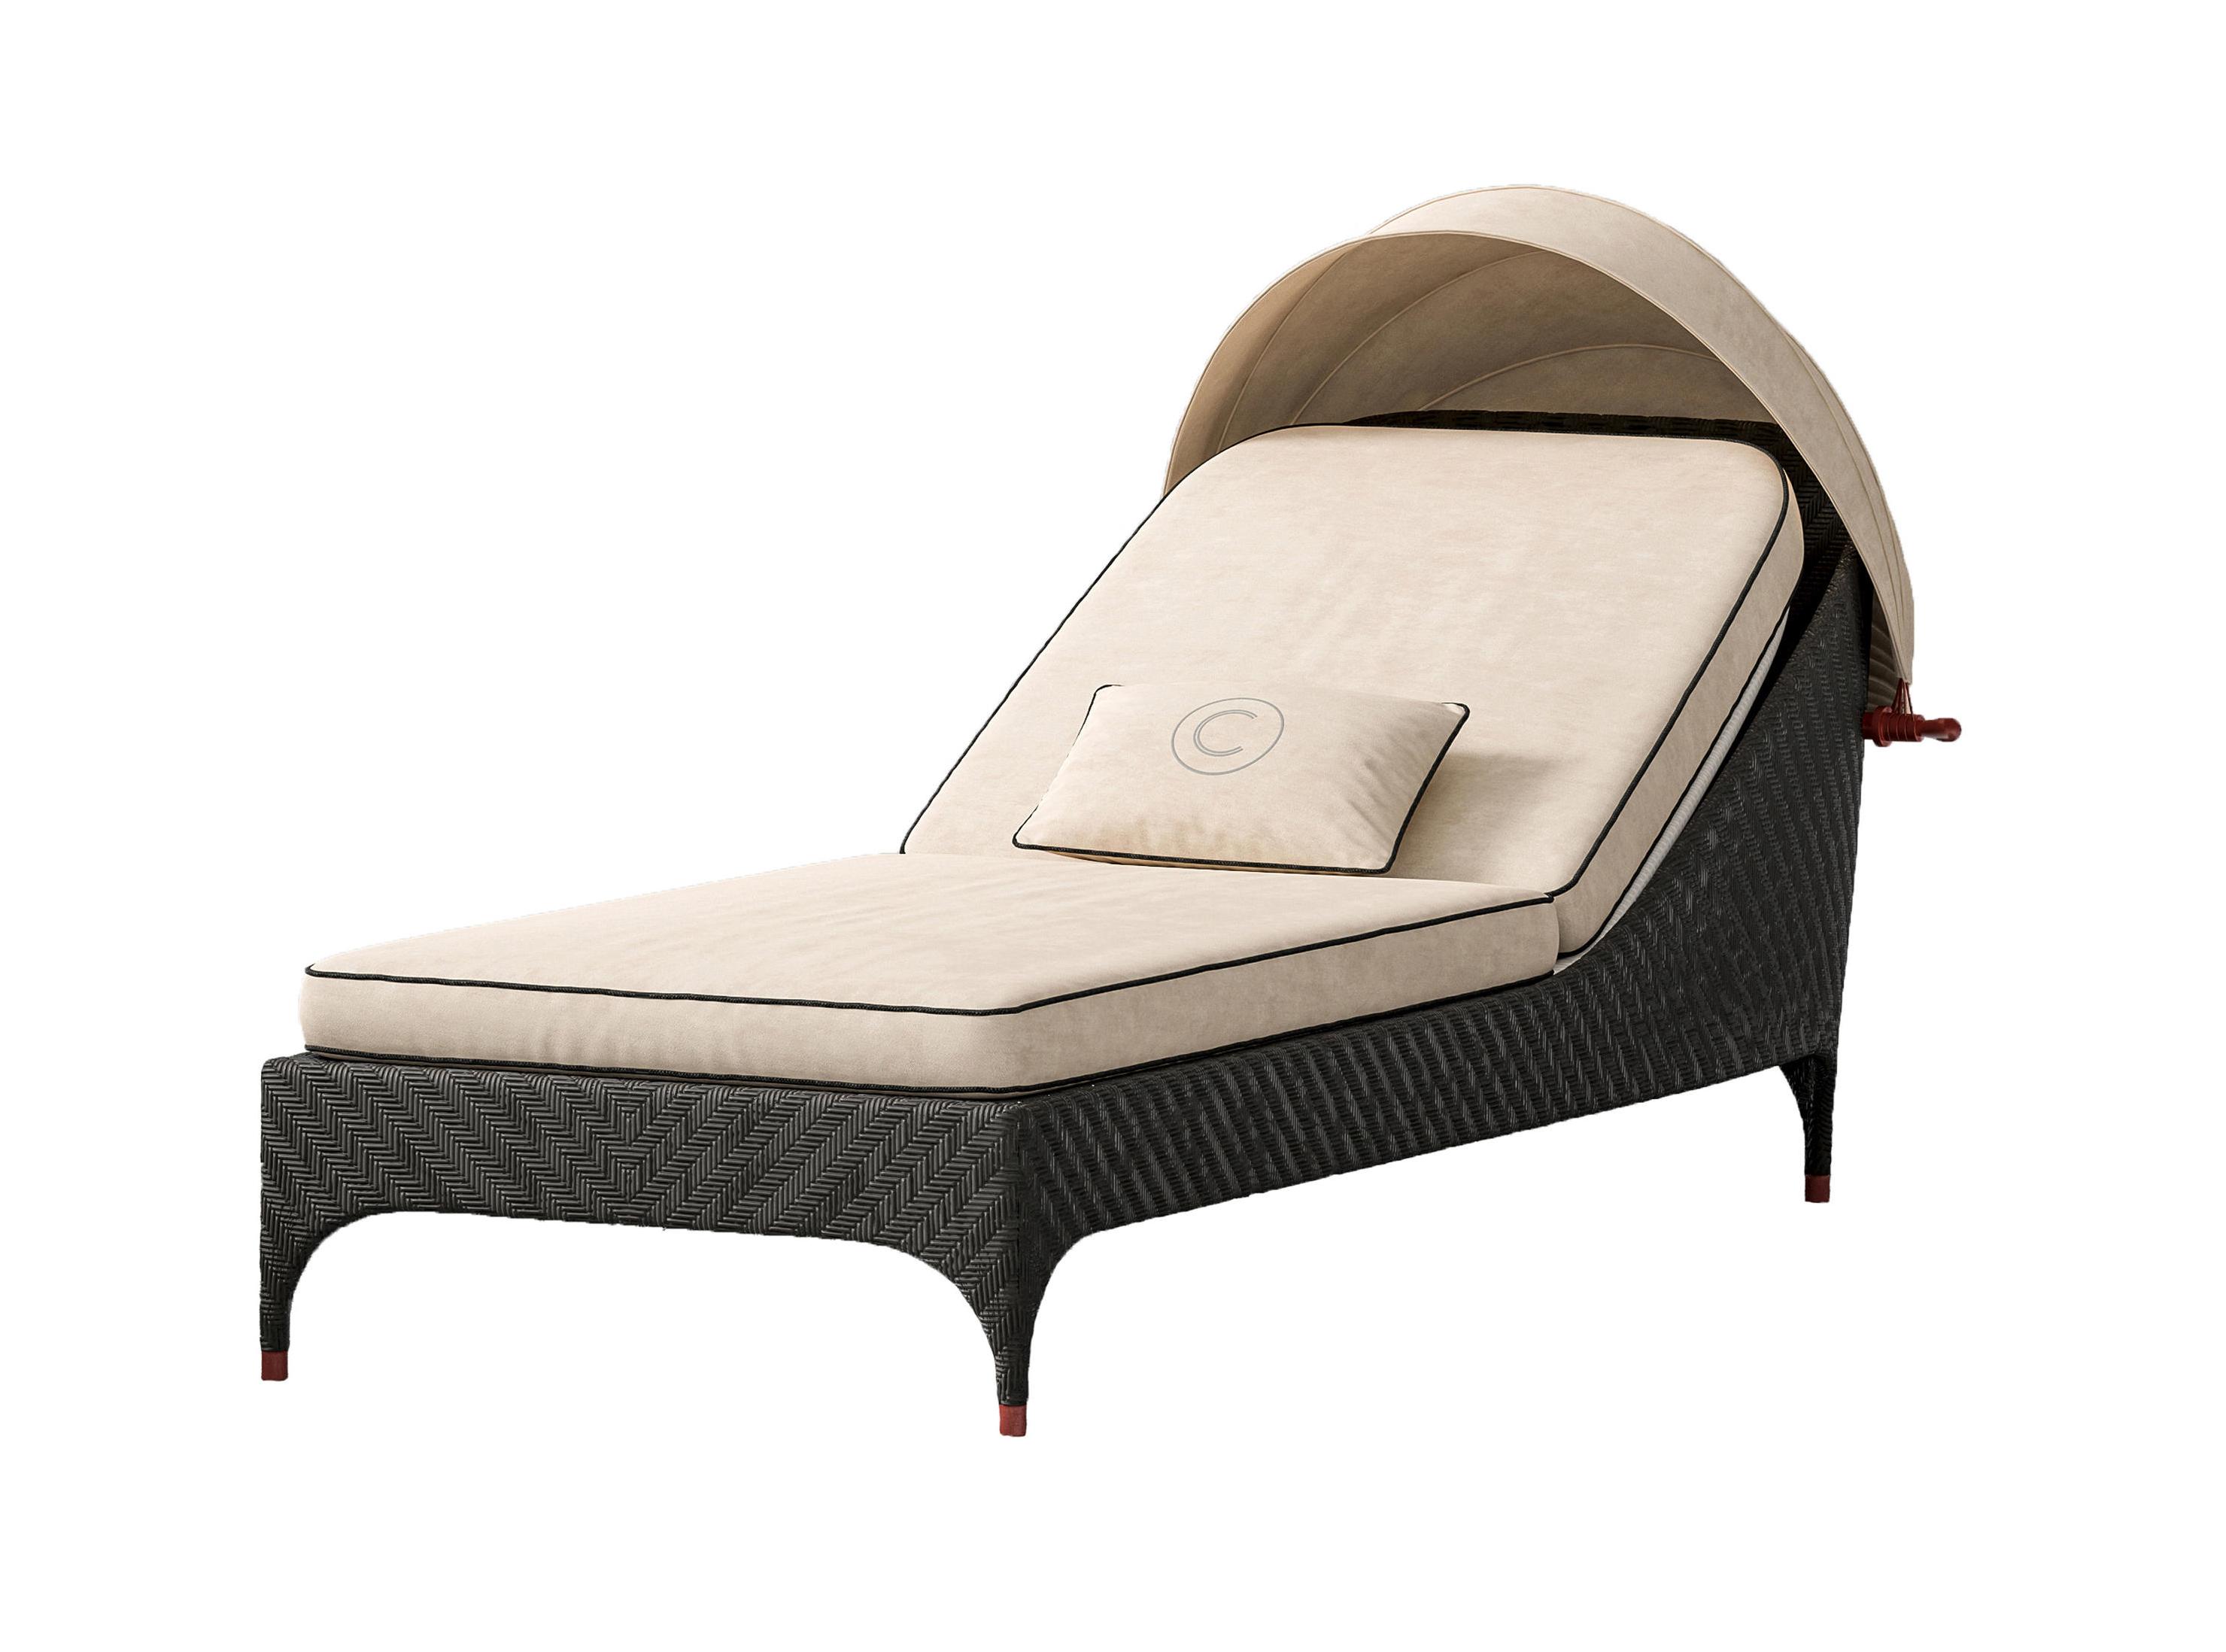 Italian Outdoor Chaise Lounge With Shade